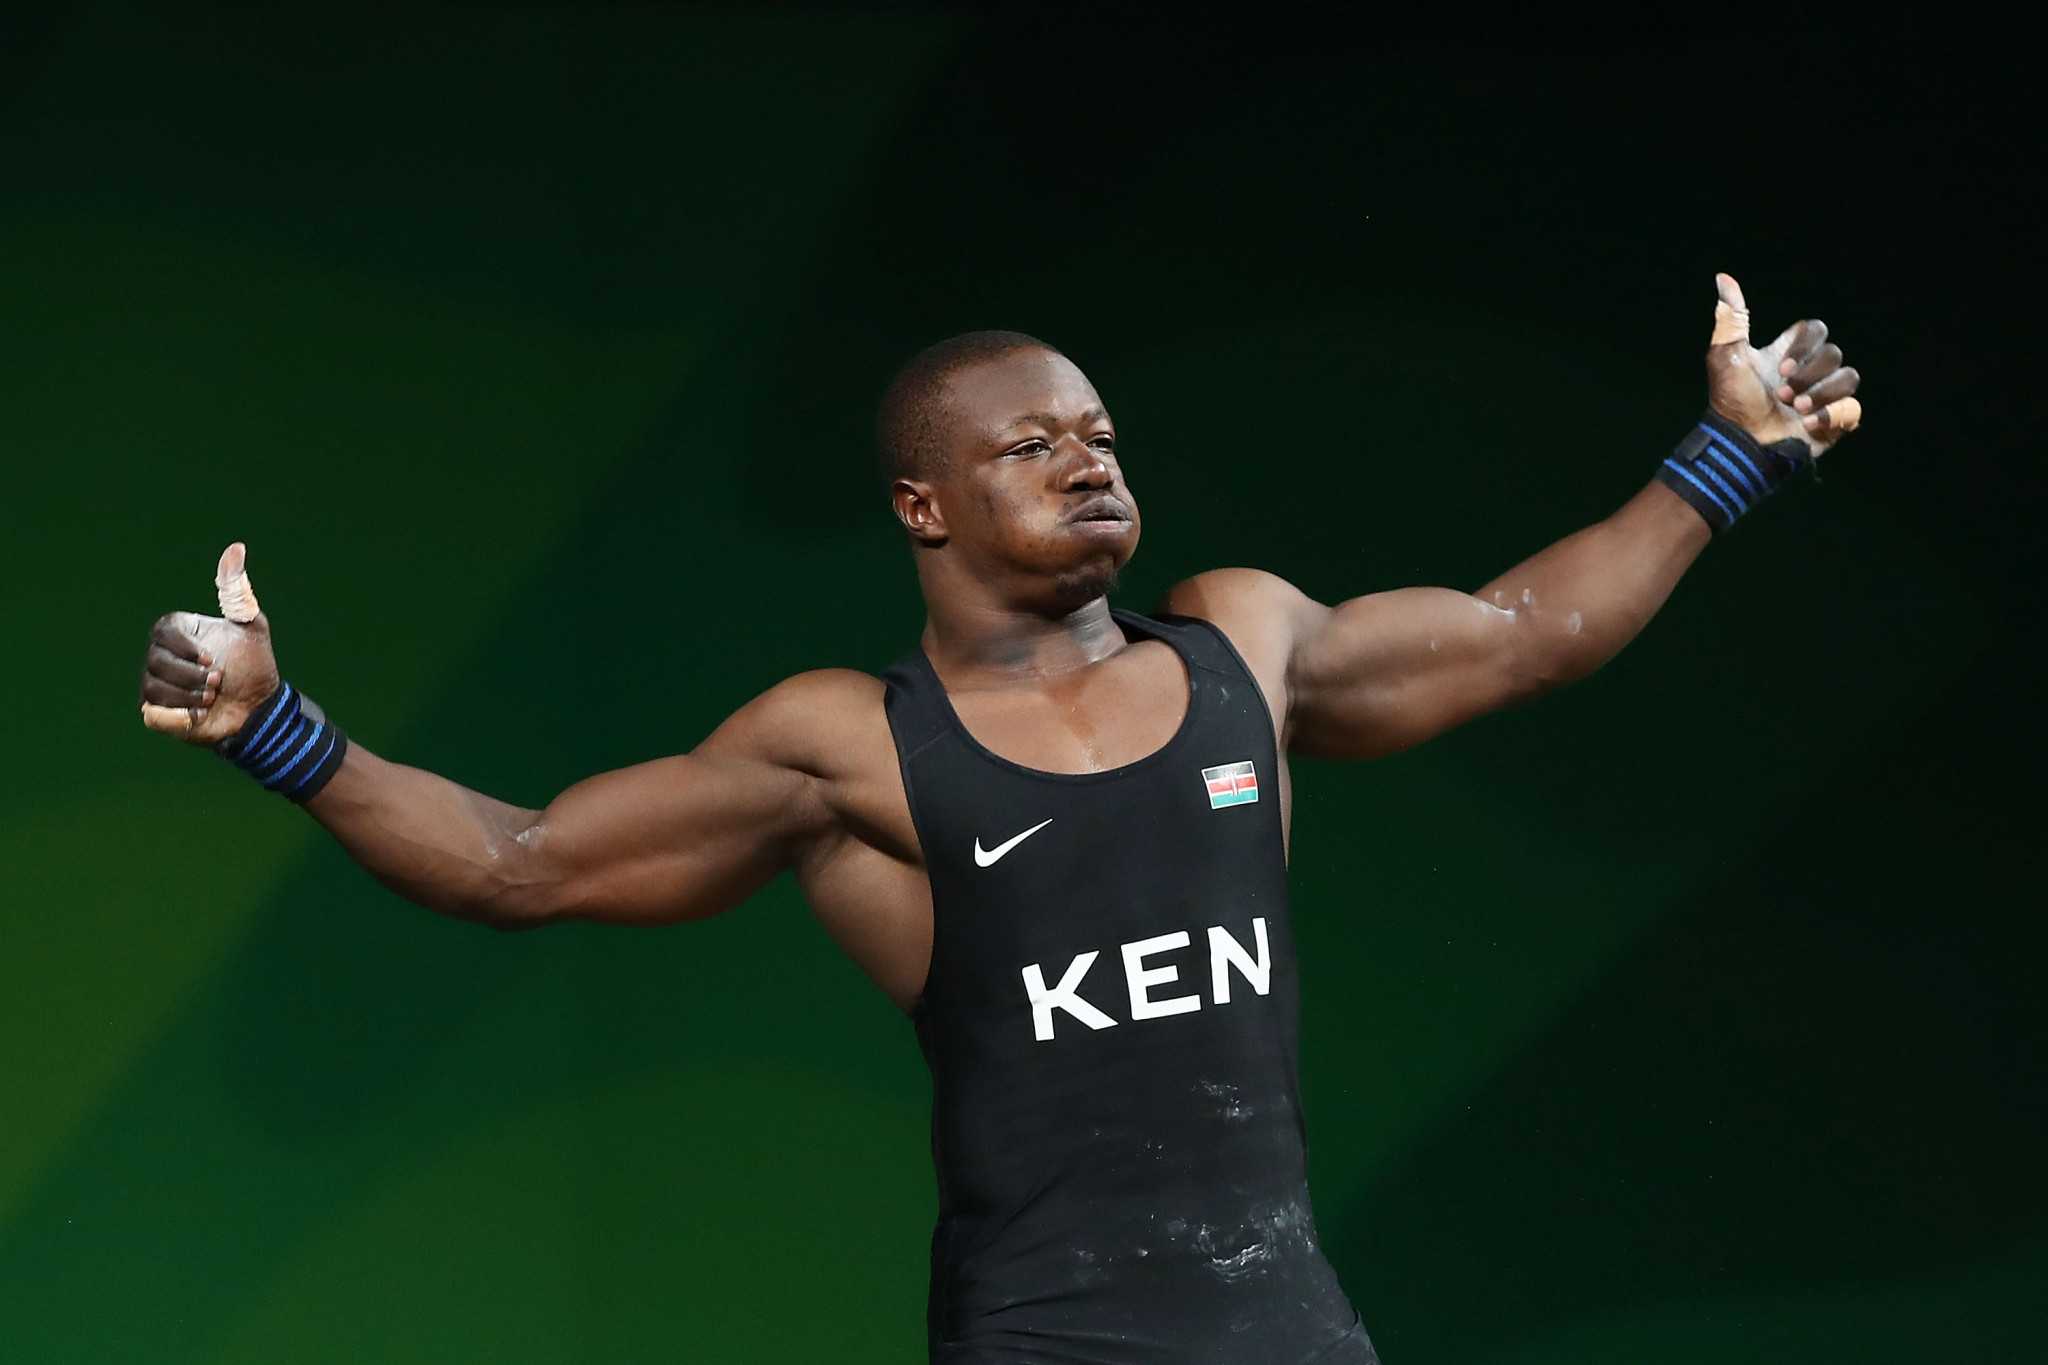 Kenya has been awarded a major weightlifting event ©Getty Images